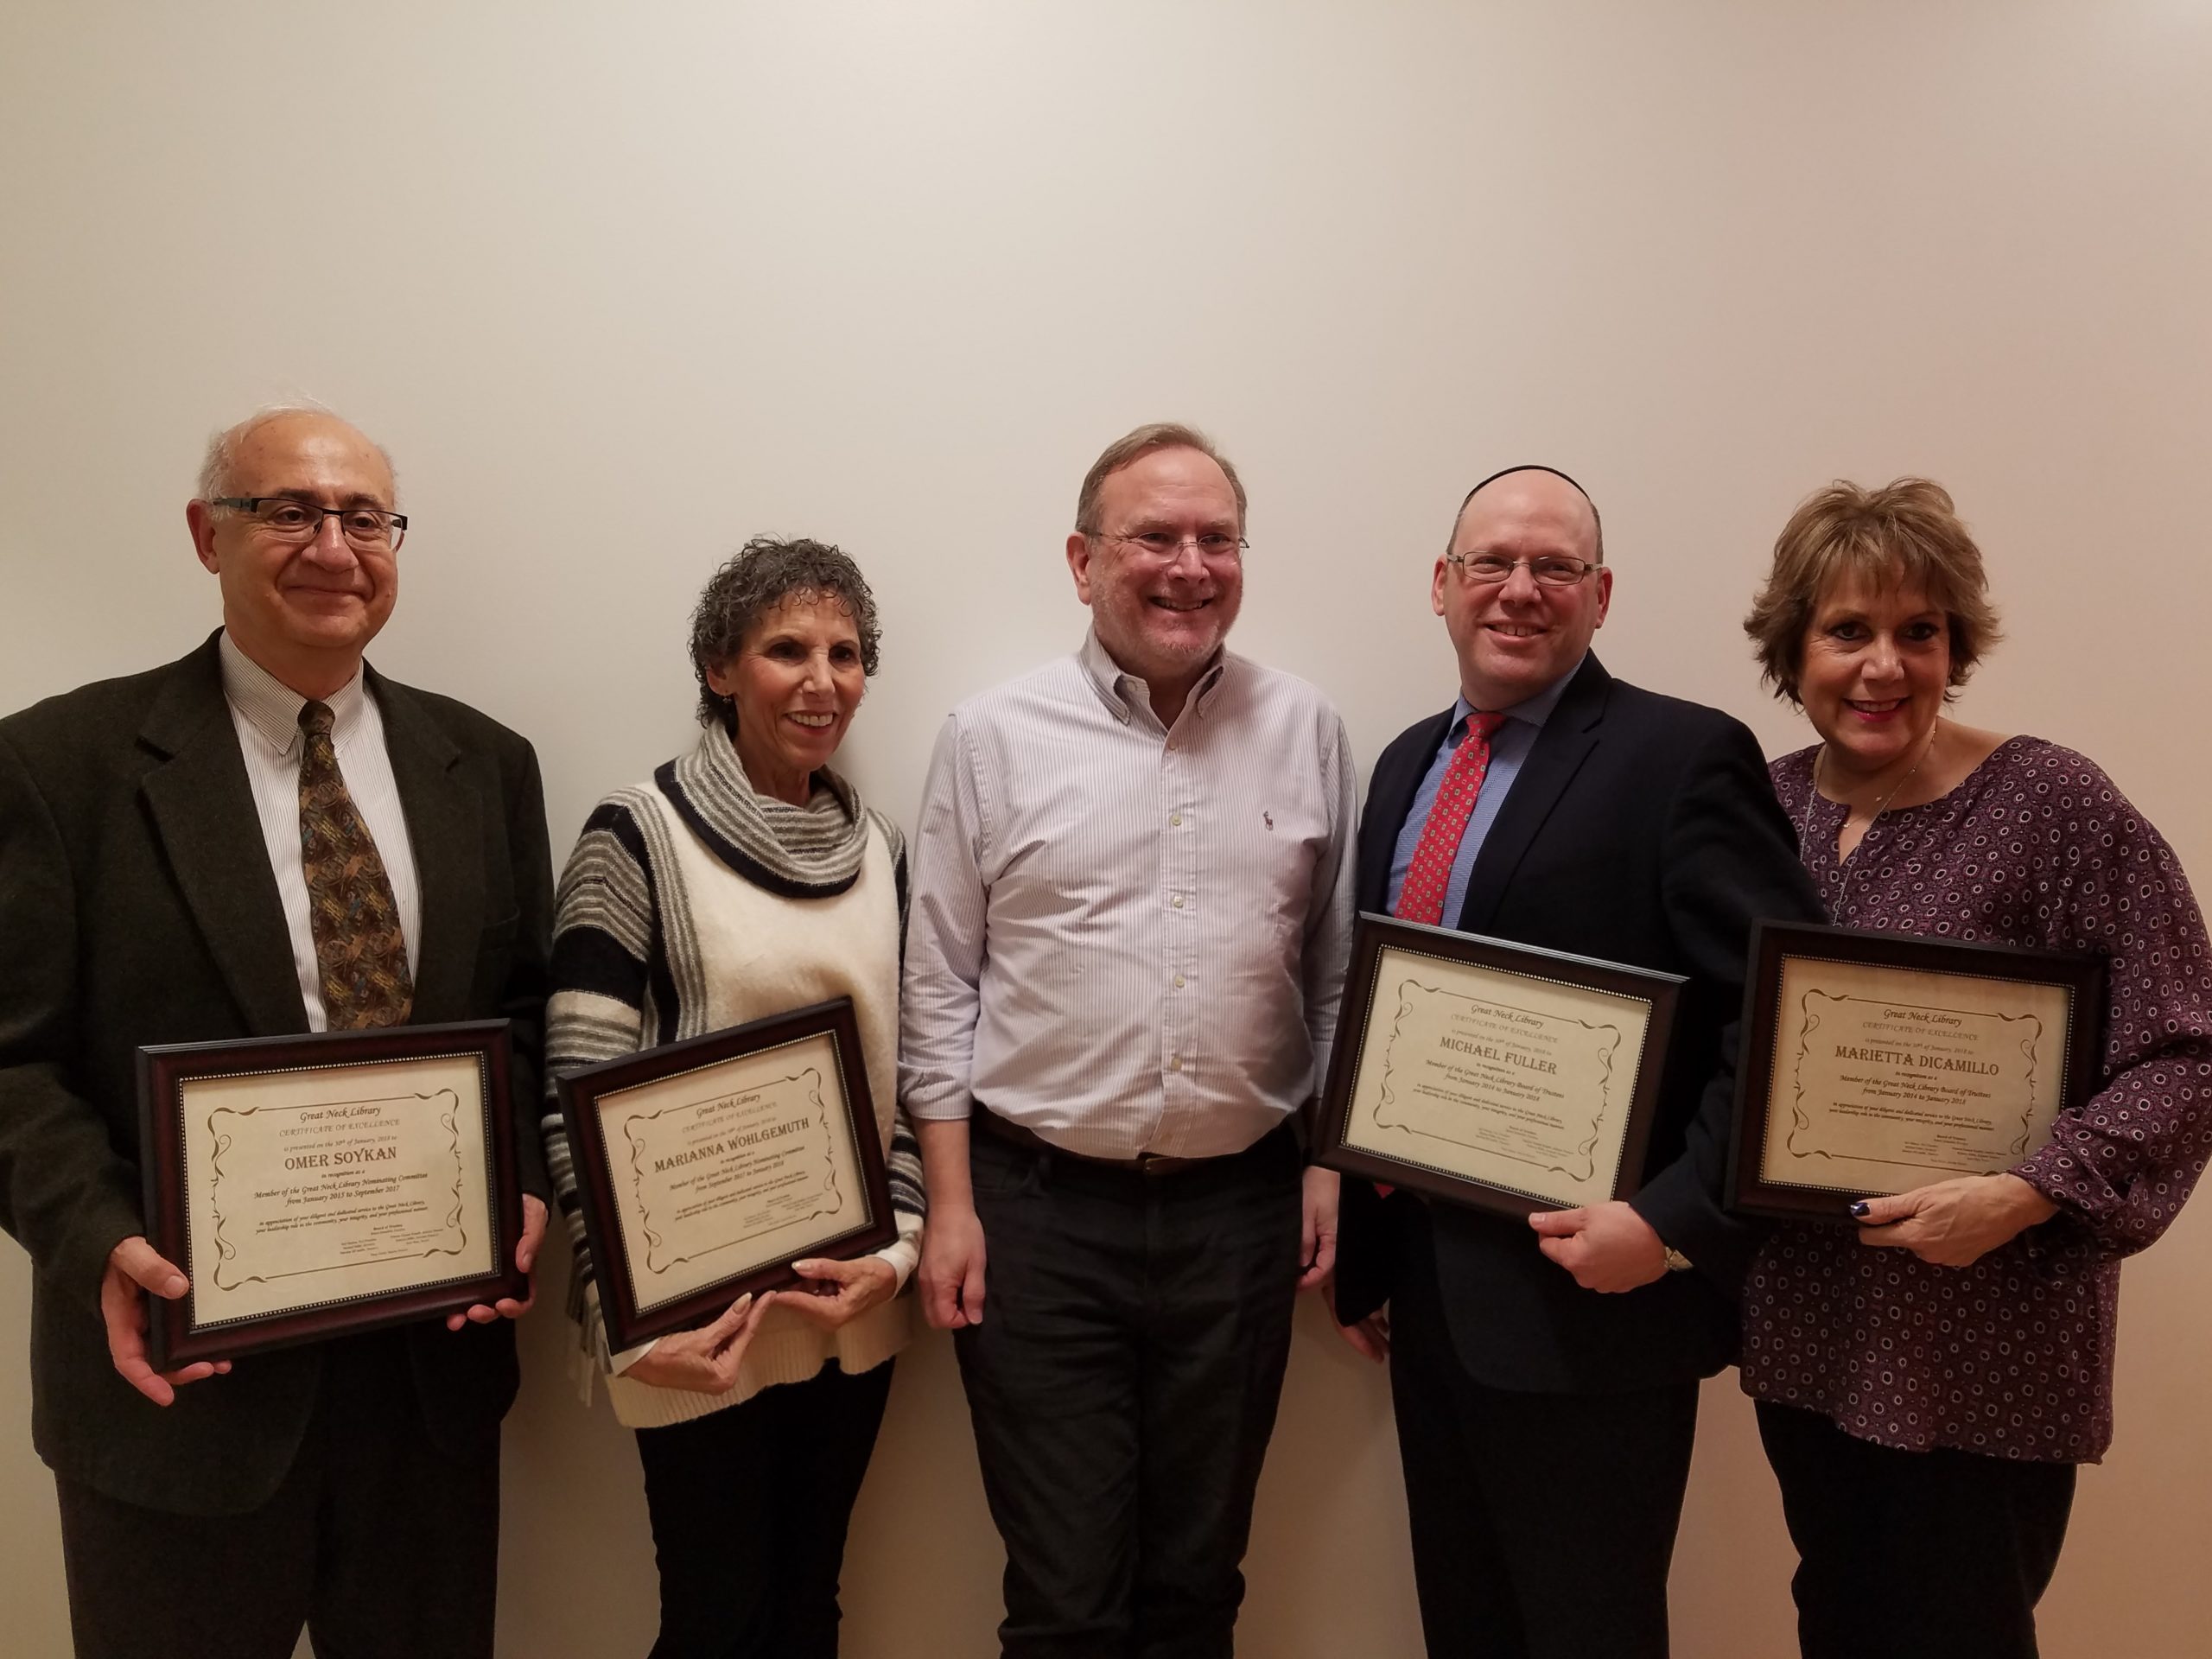 The Great Neck Library Board of Trustees held its annual Reorganization meeting on Jan. 30. Outgoing members were presented with certificates of recognition, including Omer Soykan, Marianna Wohlgemuth, Robert Schaufeld, Michael Fuller, and Marietta DiCamillo. (Photo courtesy of the Great Neck Library)